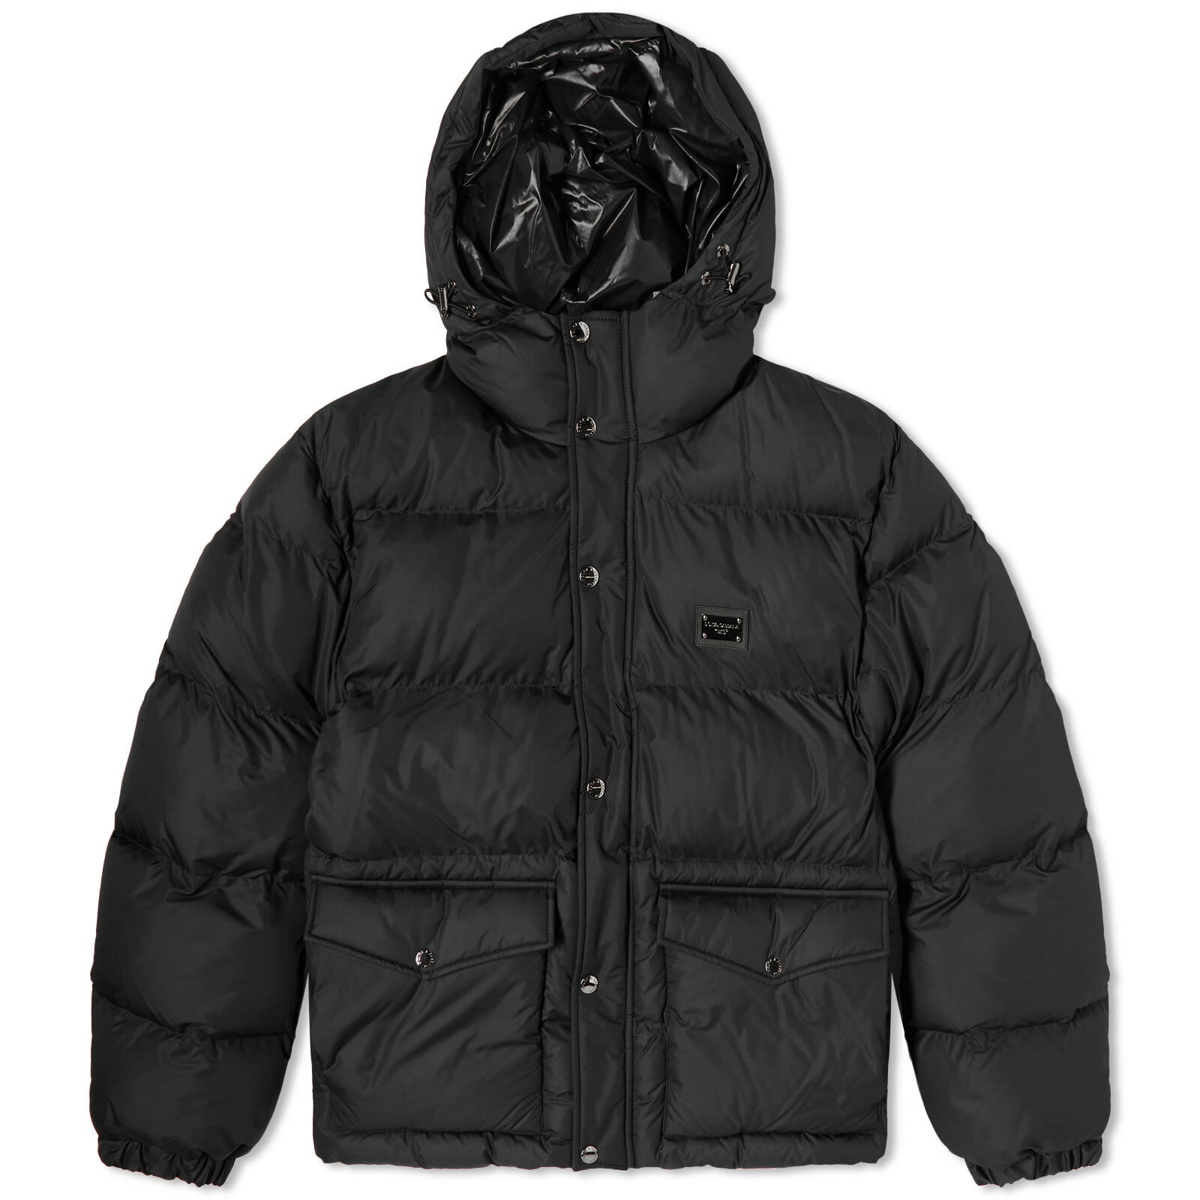 Dolce & Gabbana Men's Plate Covertible Down Jacket Gilet in Black Dolce ...